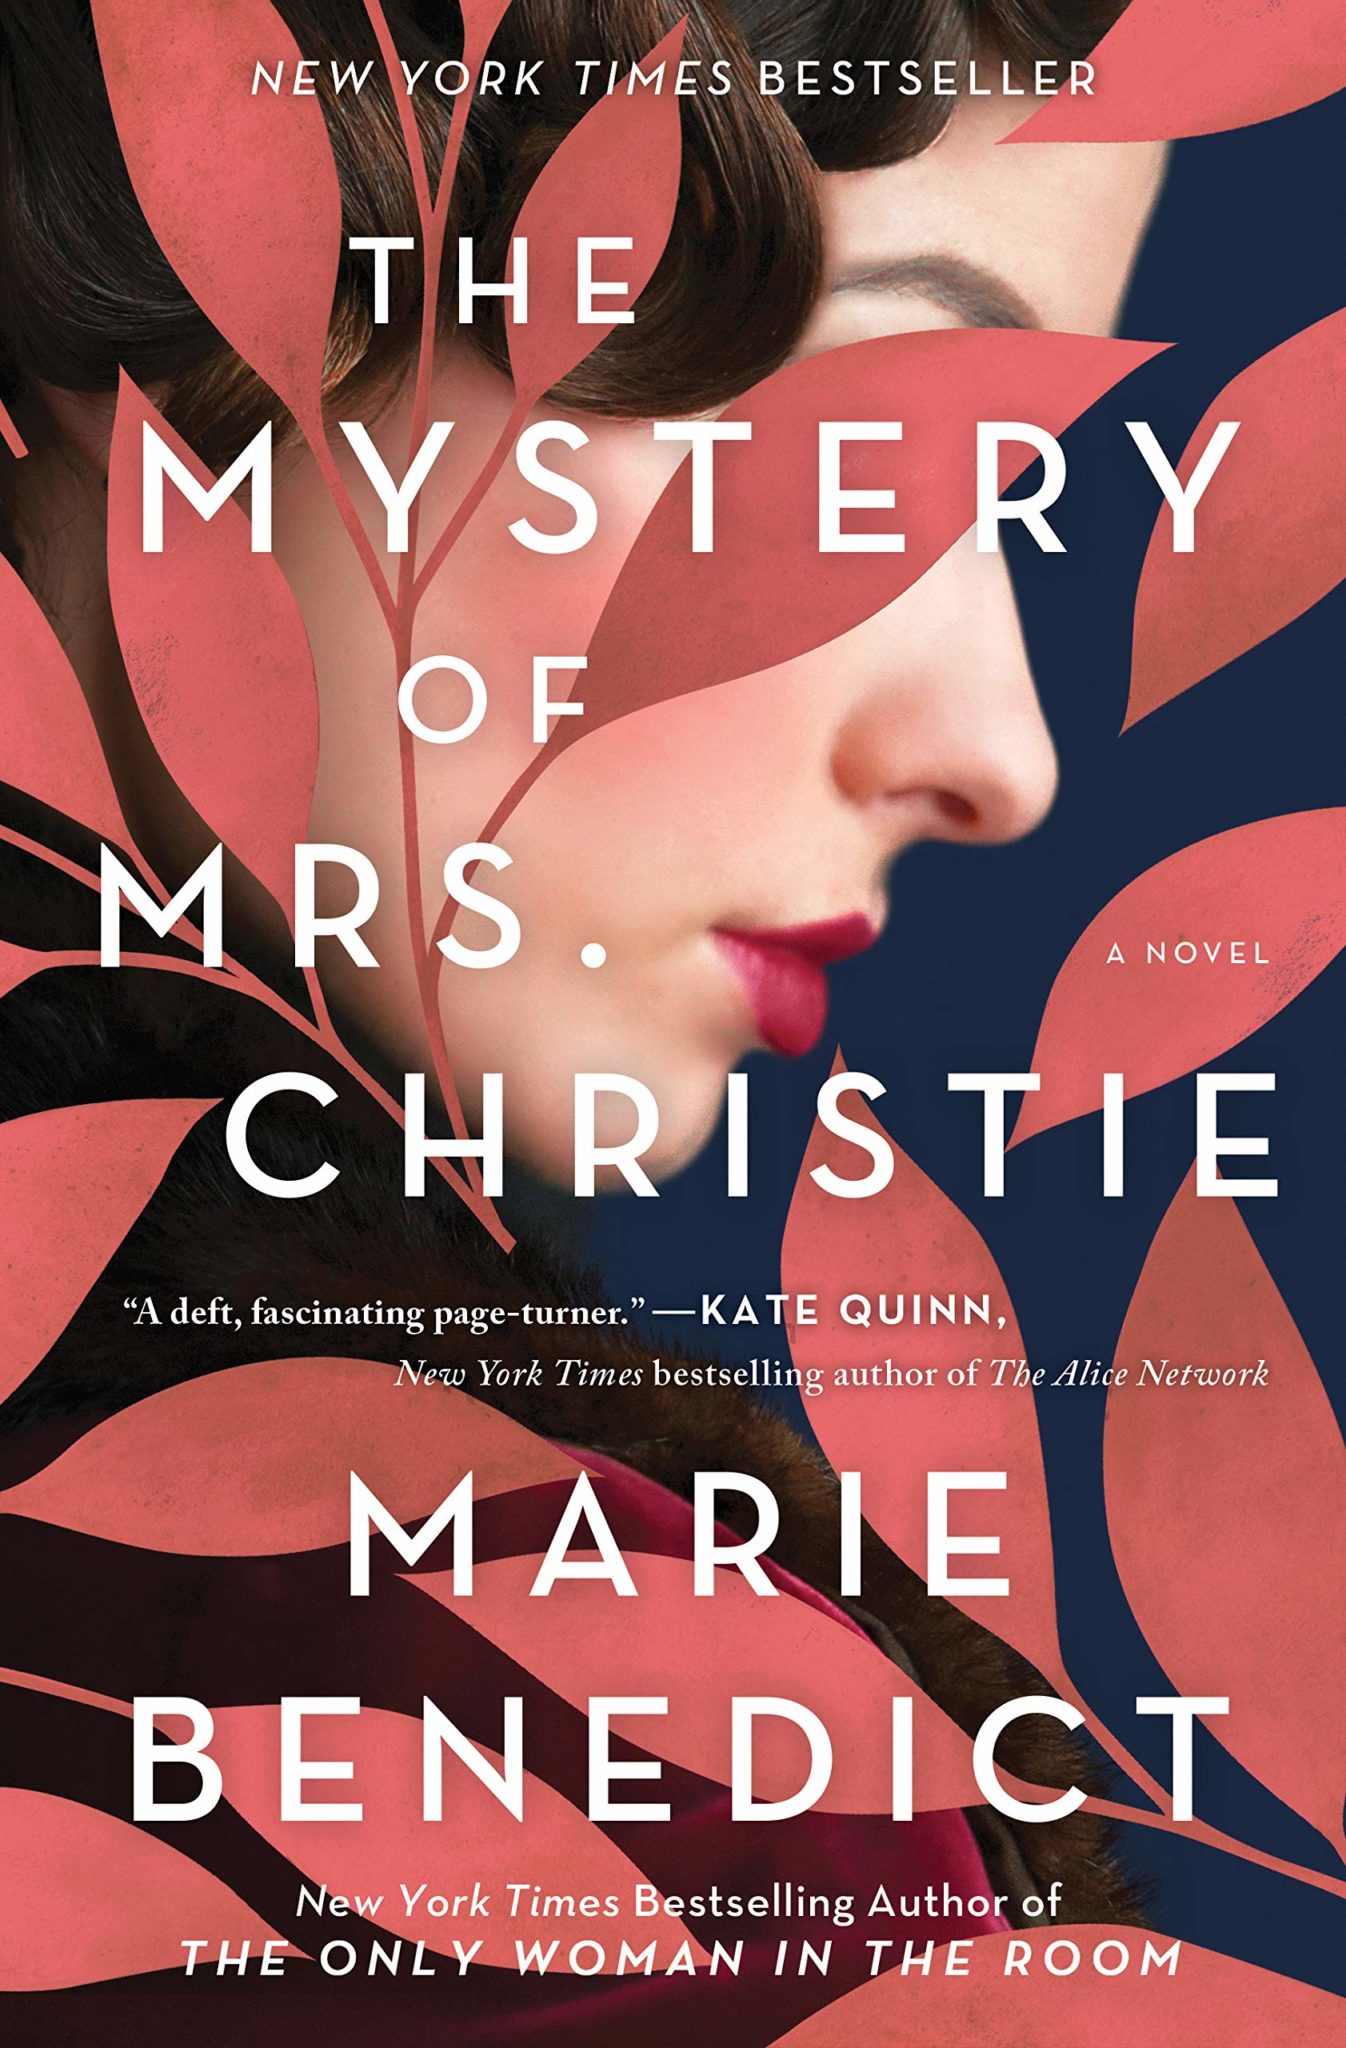 book the mystery of mrs christie